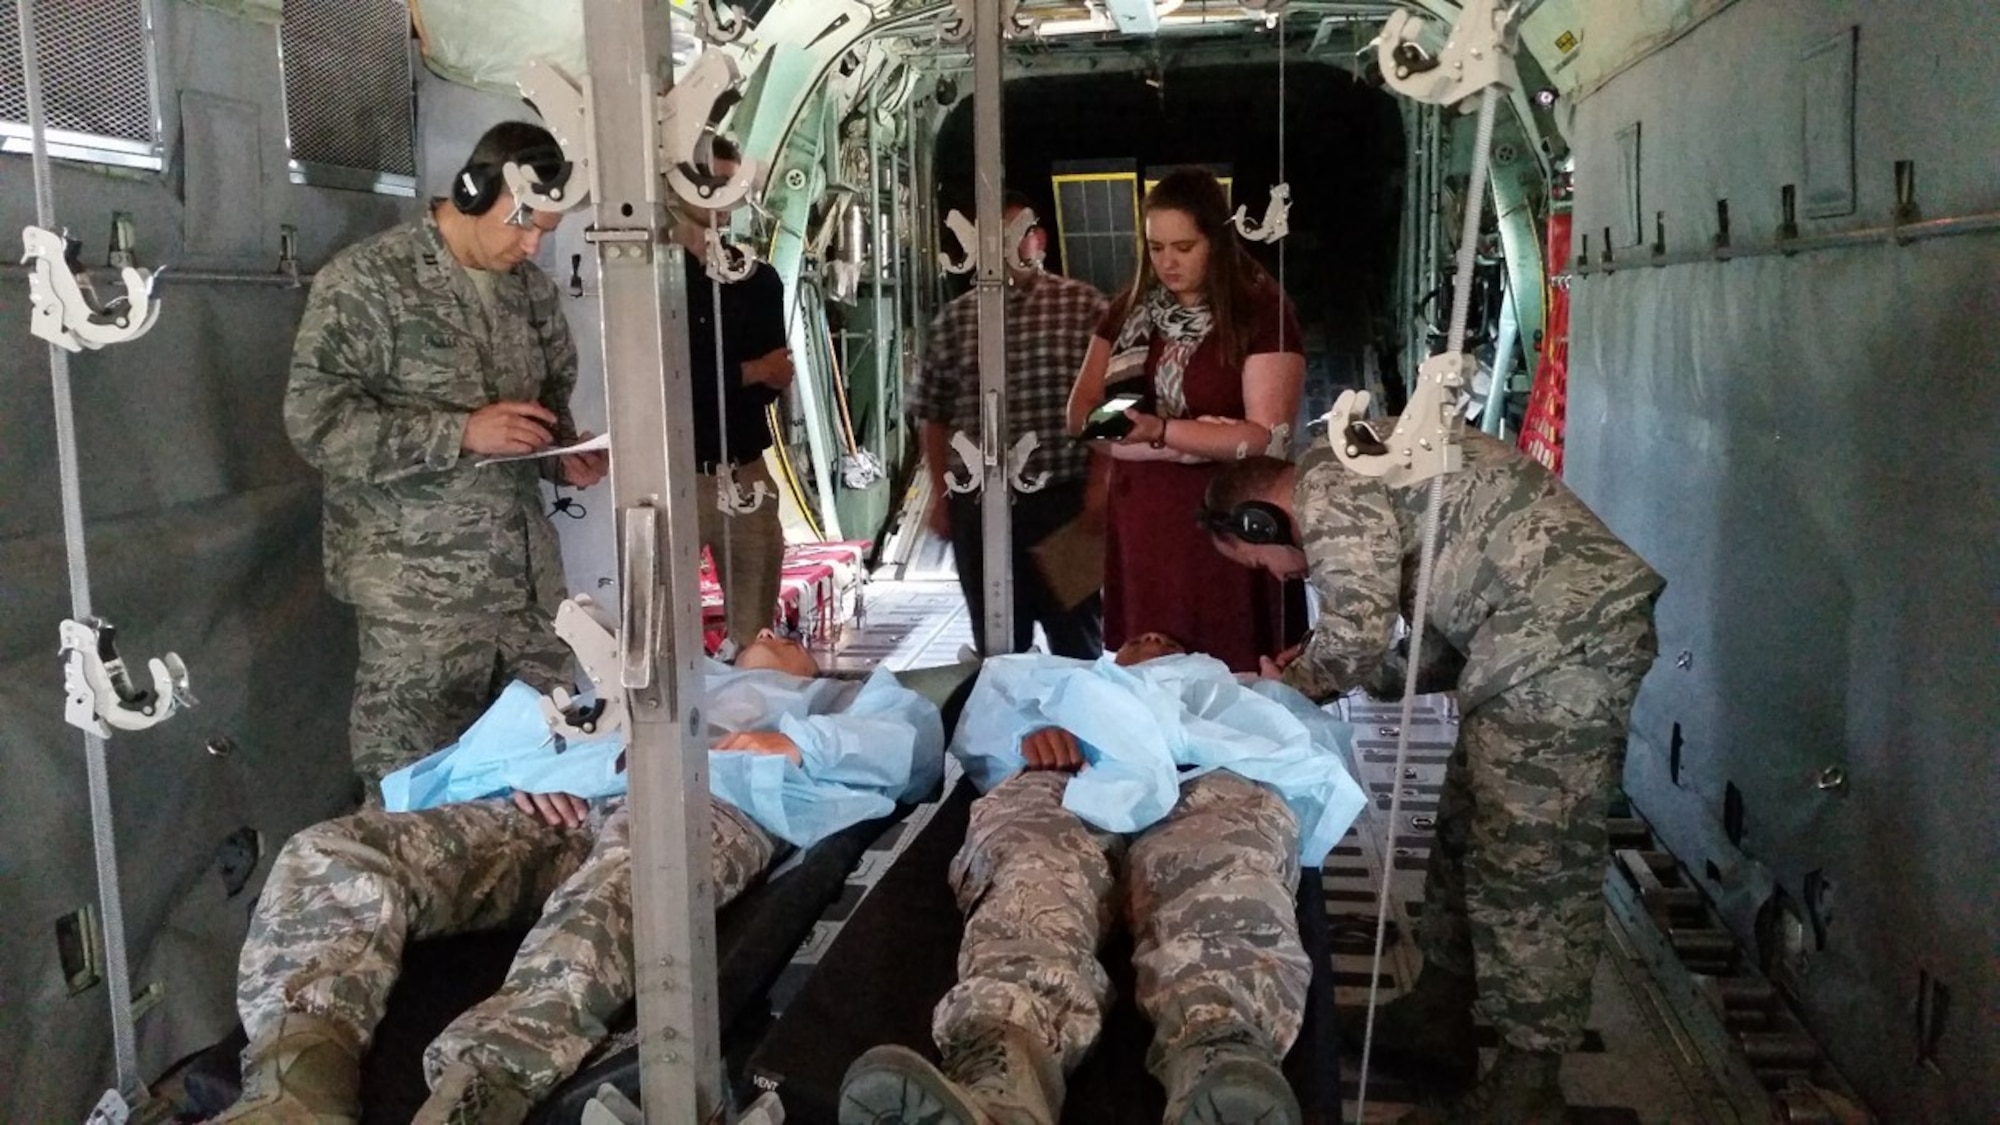 Researchers with the 711th Human Performance Wing at Wright-Patterson Air Force Base, Ohio, evaluate the noise-immune stethoscope on mock patients, Sept. 15, 2016. Prior to noise-immune stethoscope technologies, traditional stethoscope would not function properly due to the dynamic, high-noise environment of an aircraft. (Courtesy photo)